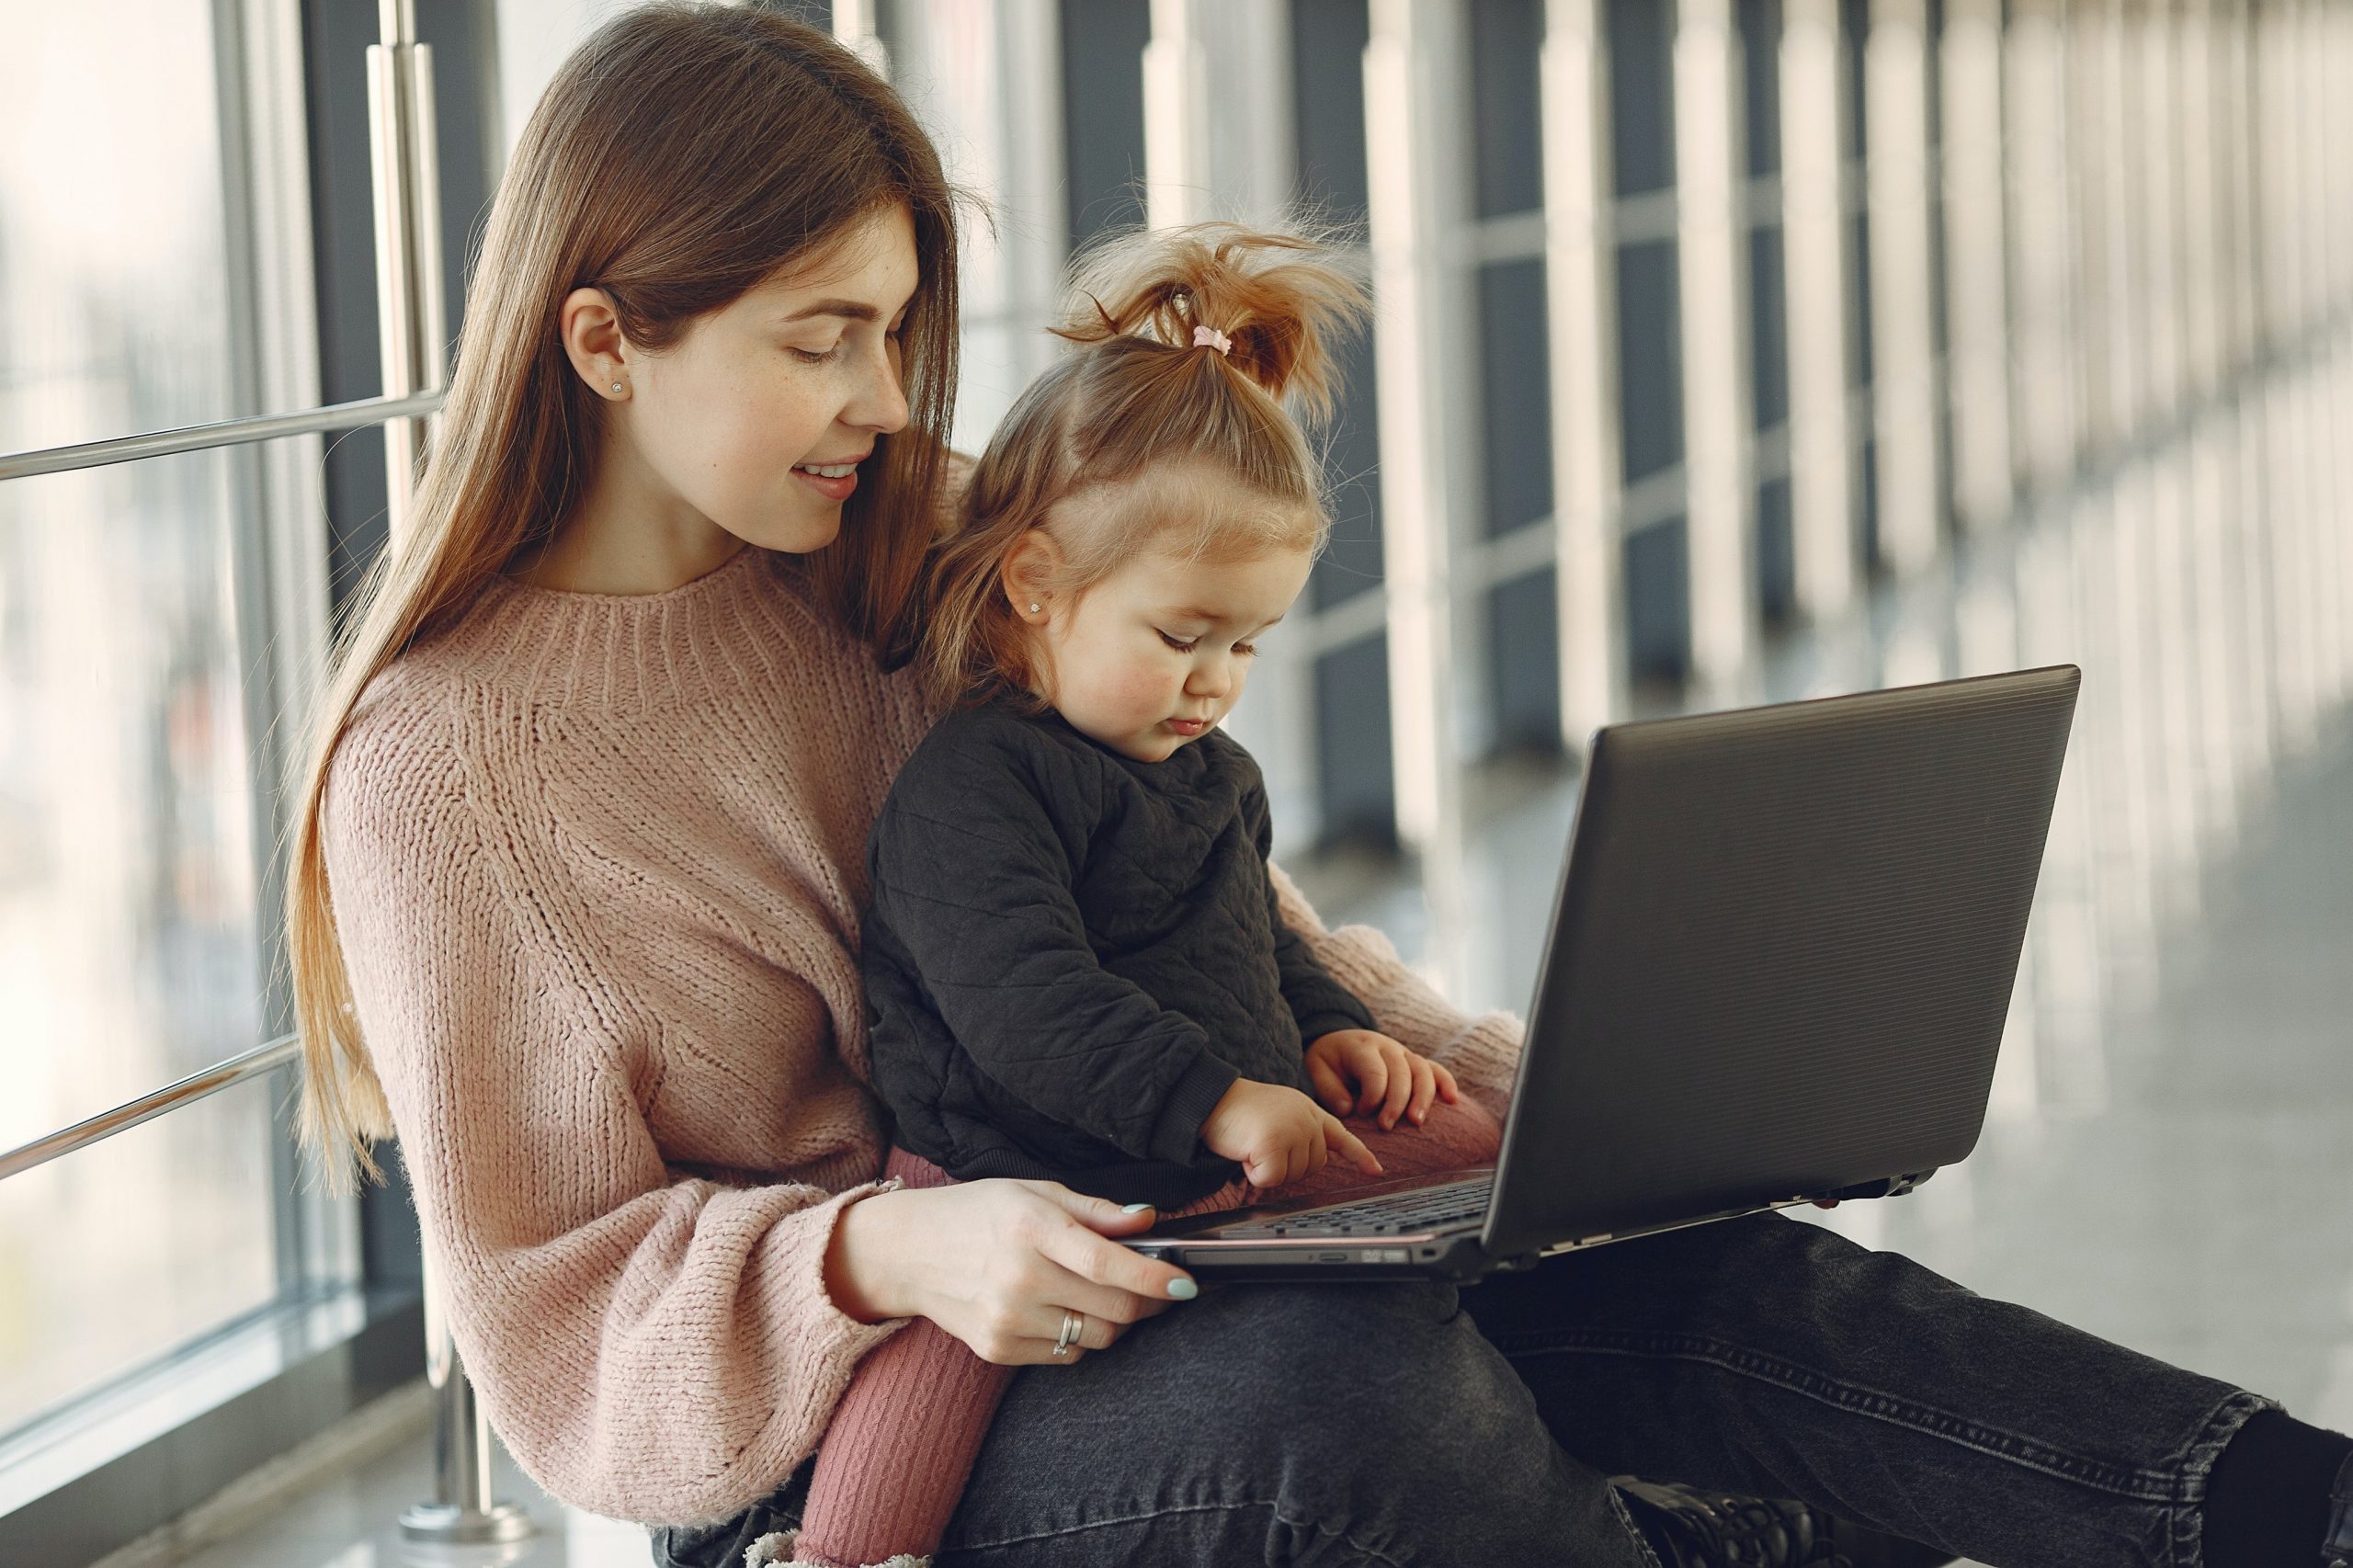 smiling-woman-with-daughter-using-laptop-4173206